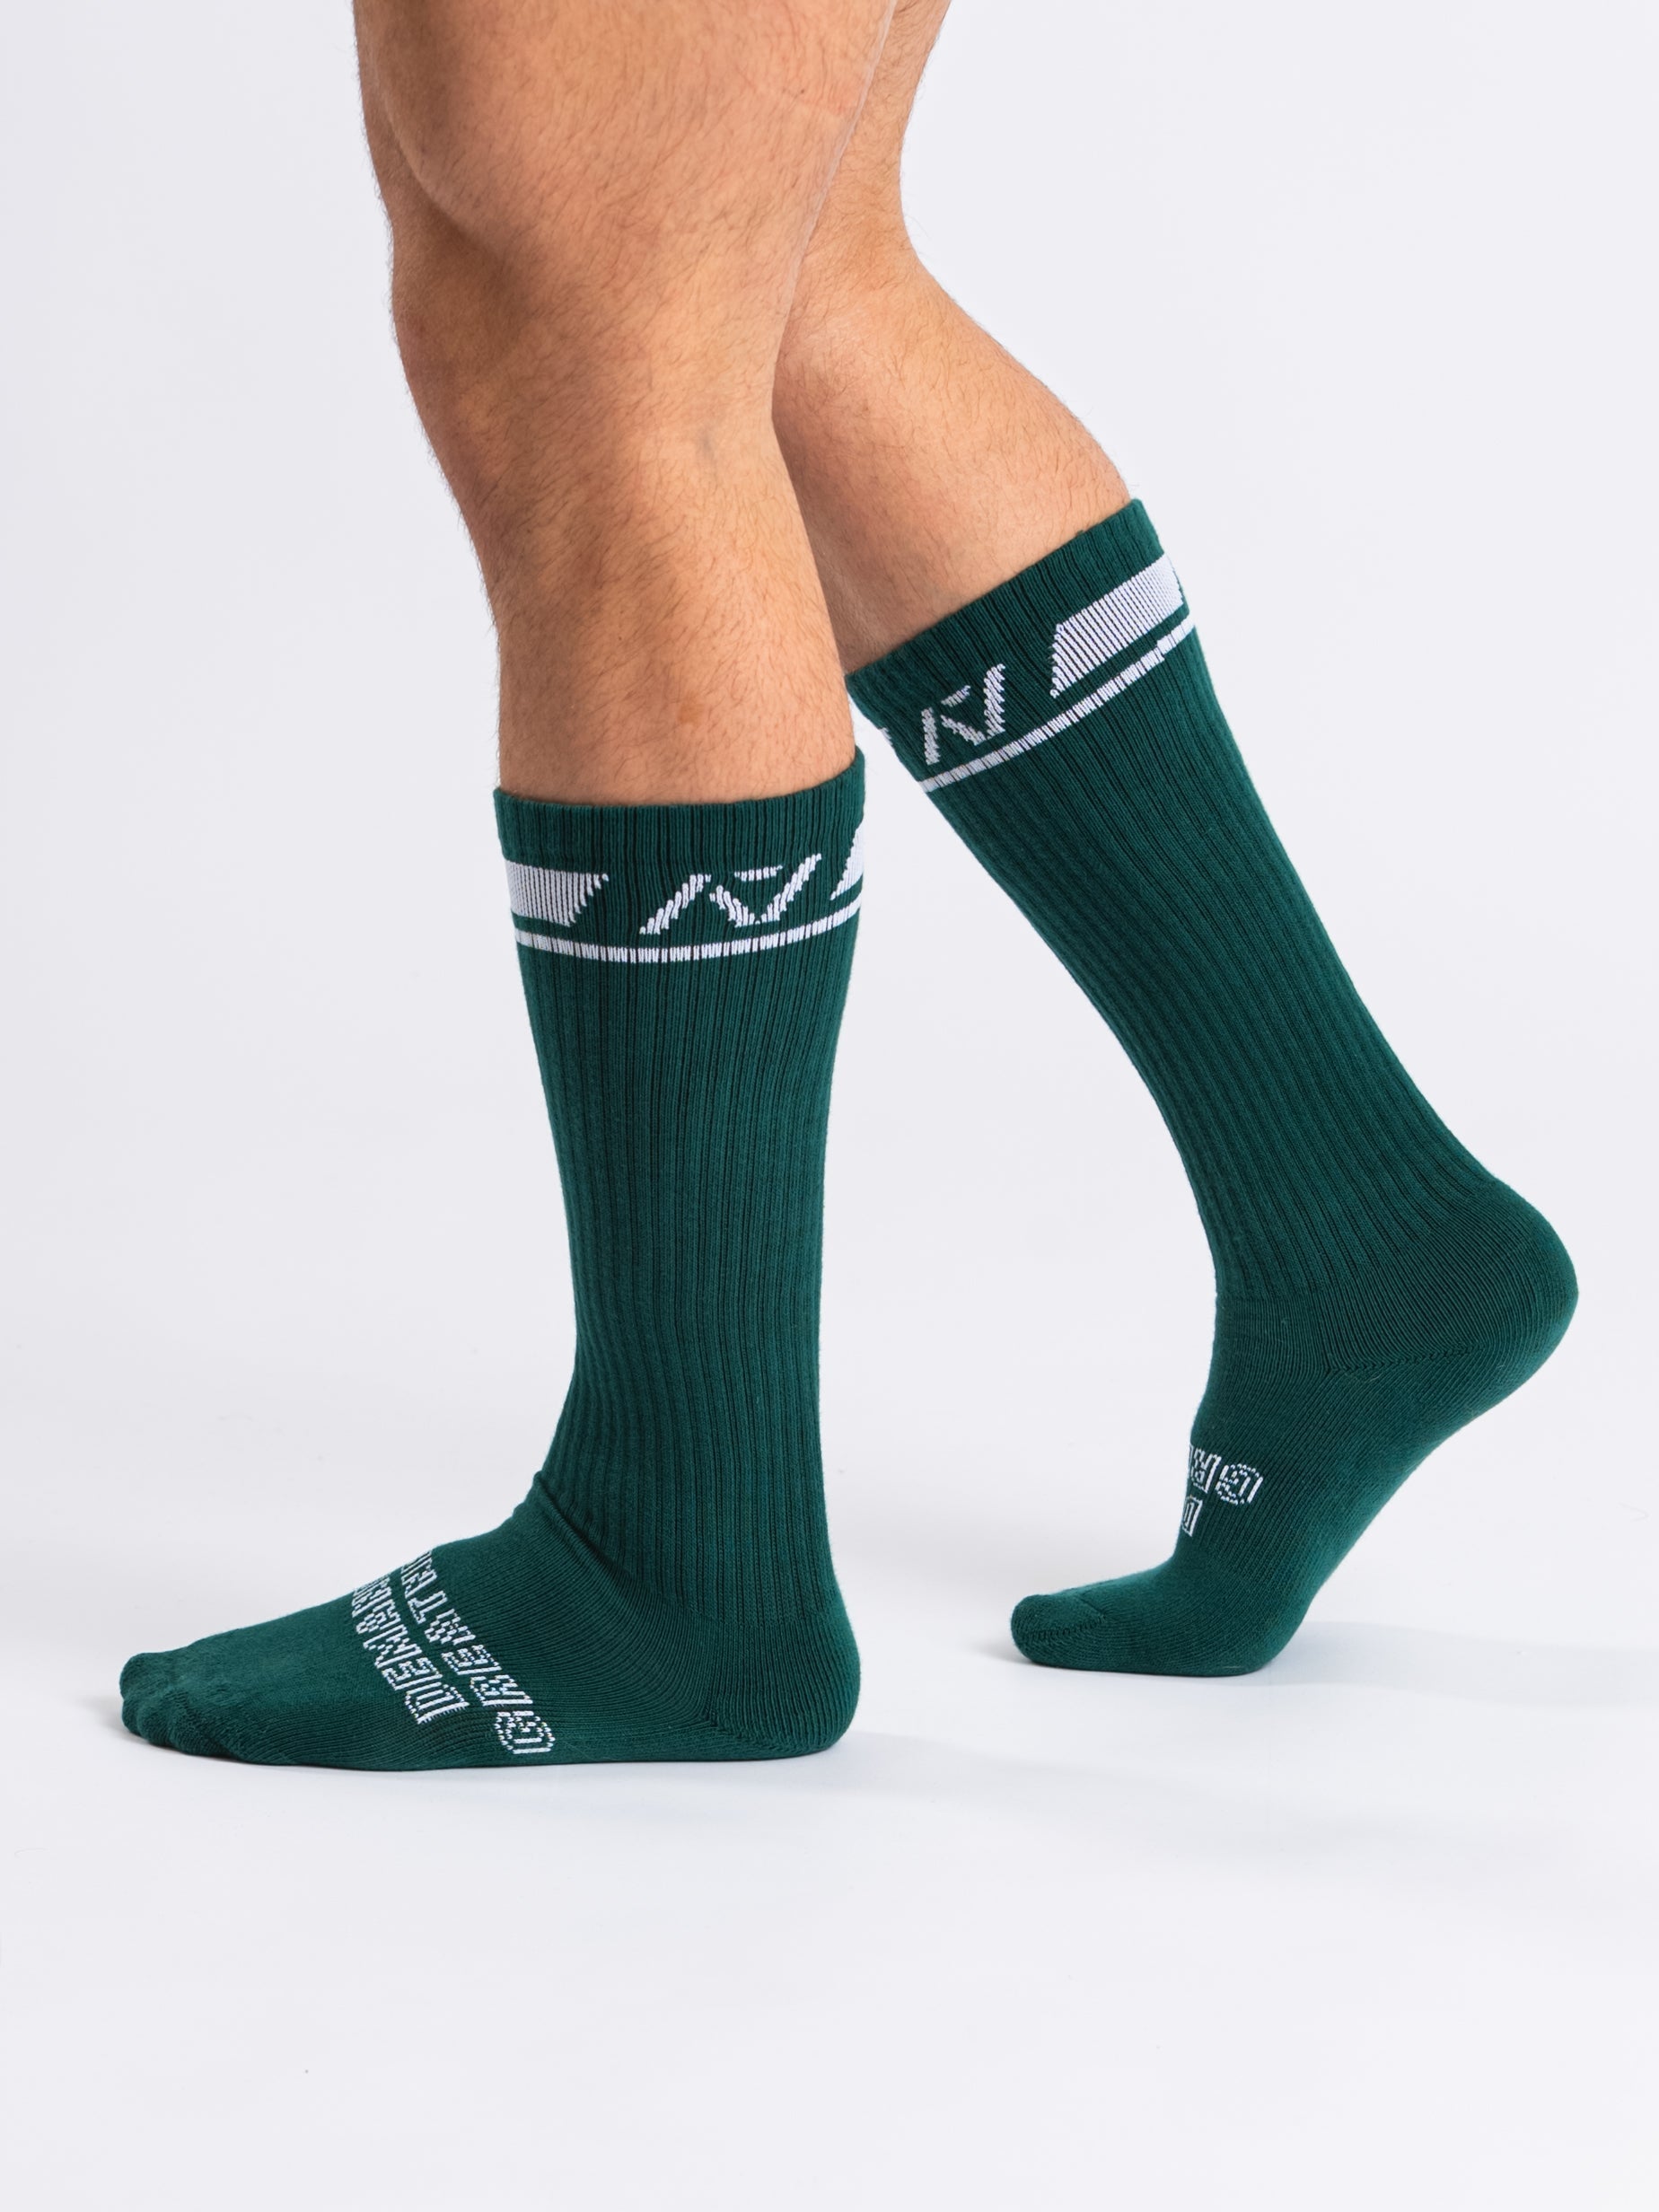 A7 Emerald Forás deadlift socks are designed specifically for pulls and keep your shins protected from scrapes. A7 deadlift socks are a perfect pair to wear in training or powerlifting competition. The A7 IPF Approved Kit includes Powerlifting Singlet, A7 Meet Shirt, A7 Zebra Wrist Wraps, A7 Deadlift Socks, Hourglass Knee Sleeves (Stiff Knee Sleeves and Rigor Mortis Knee Sleeves). Genouill�res powerlifting shipping to France, Spain, Ireland, Germany, Italy, Sweden and EU.